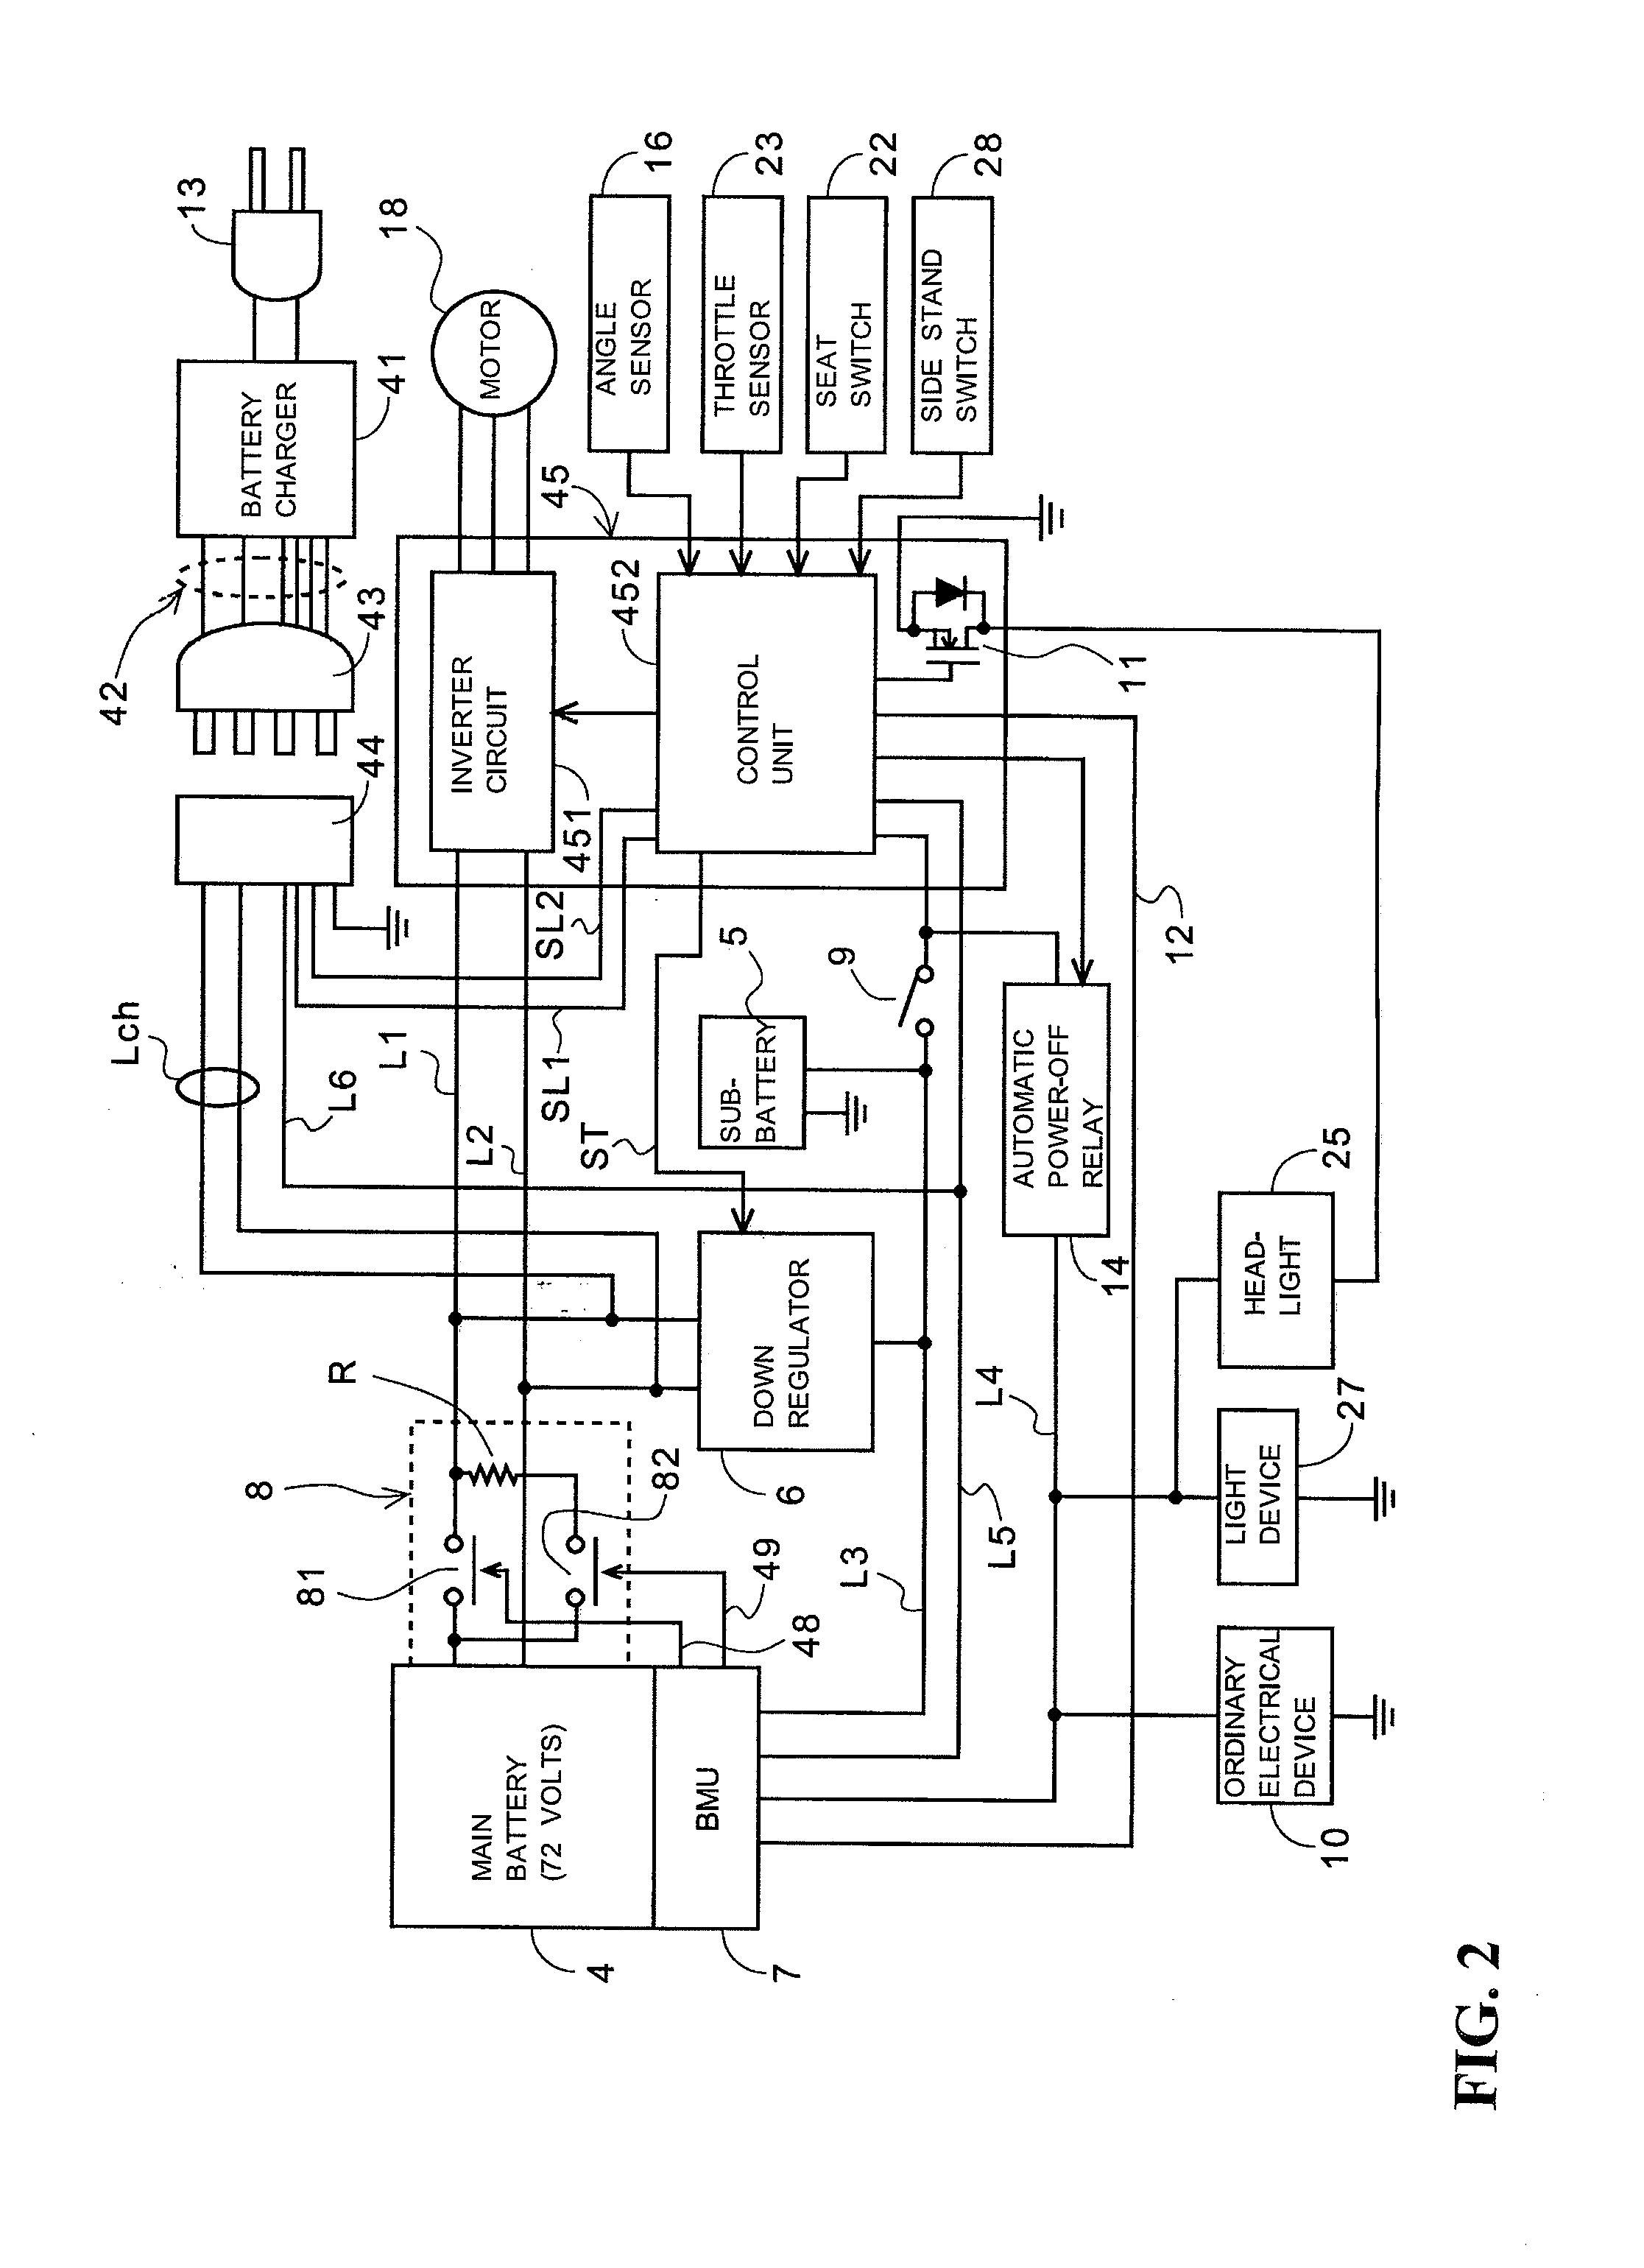 Starting control device of electric vehicle